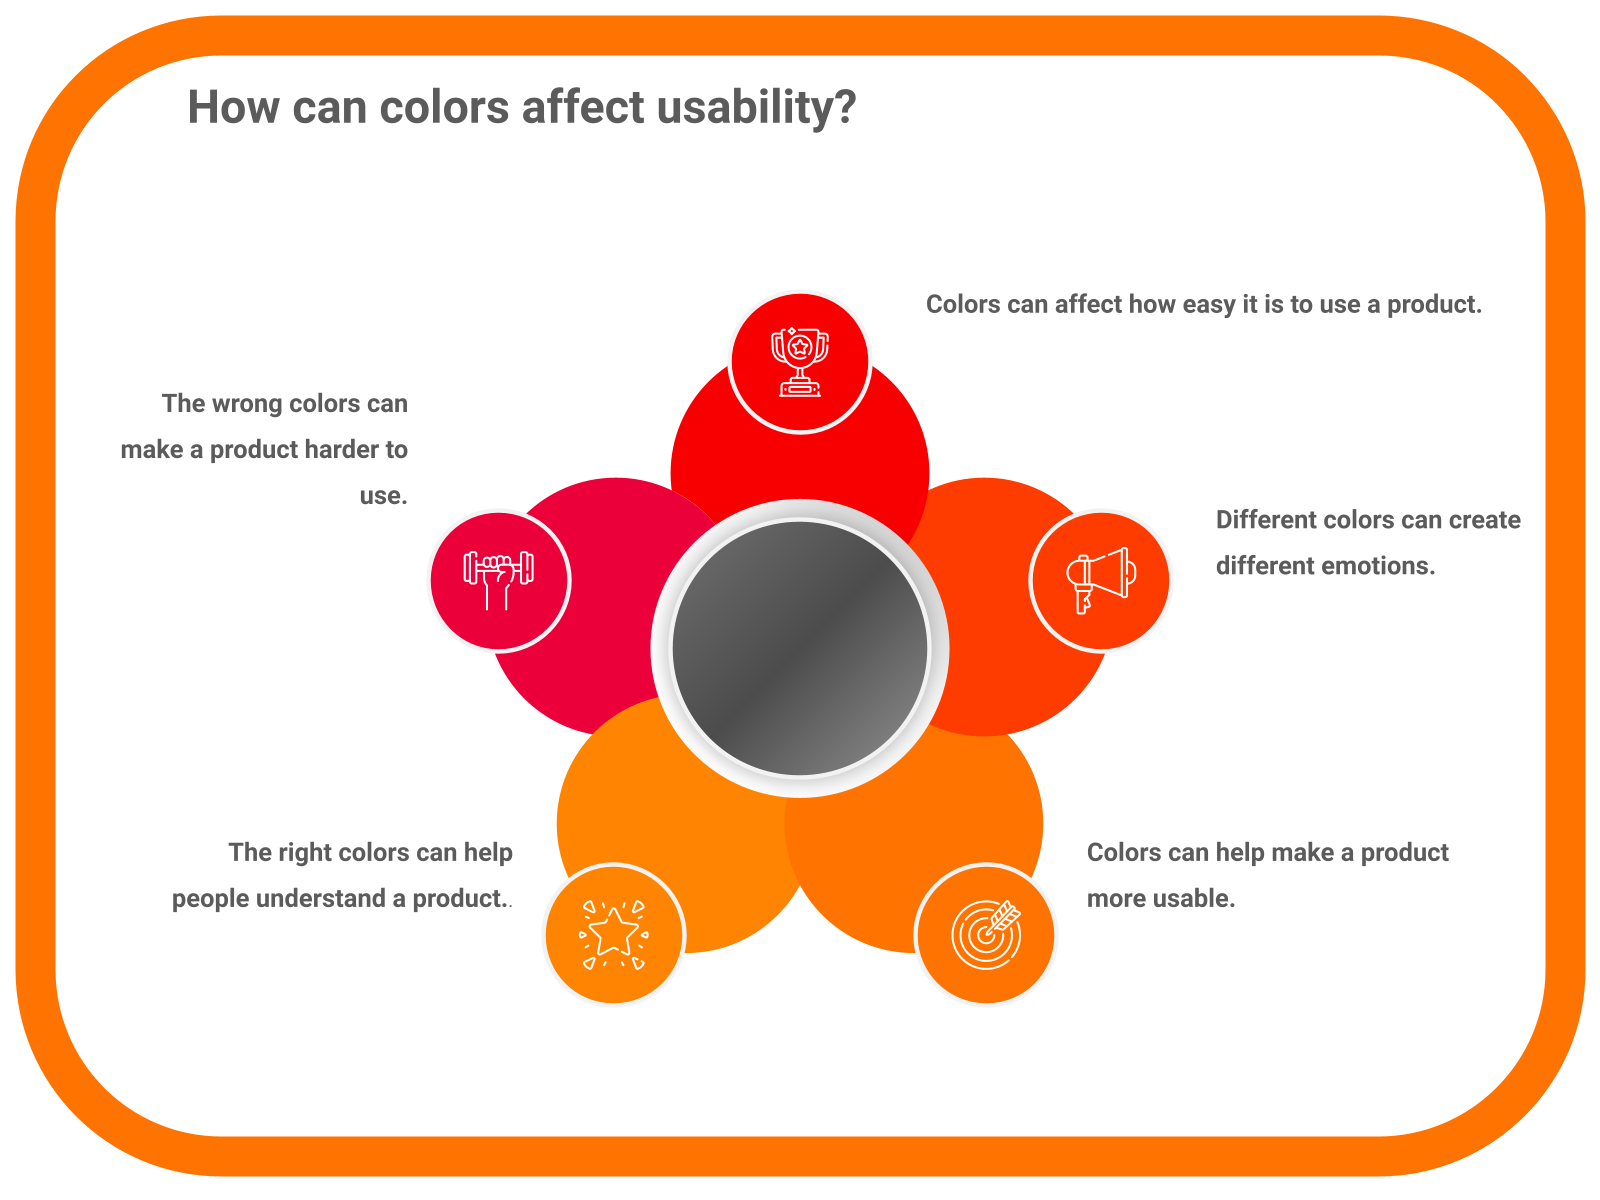 How can colors affect usability?